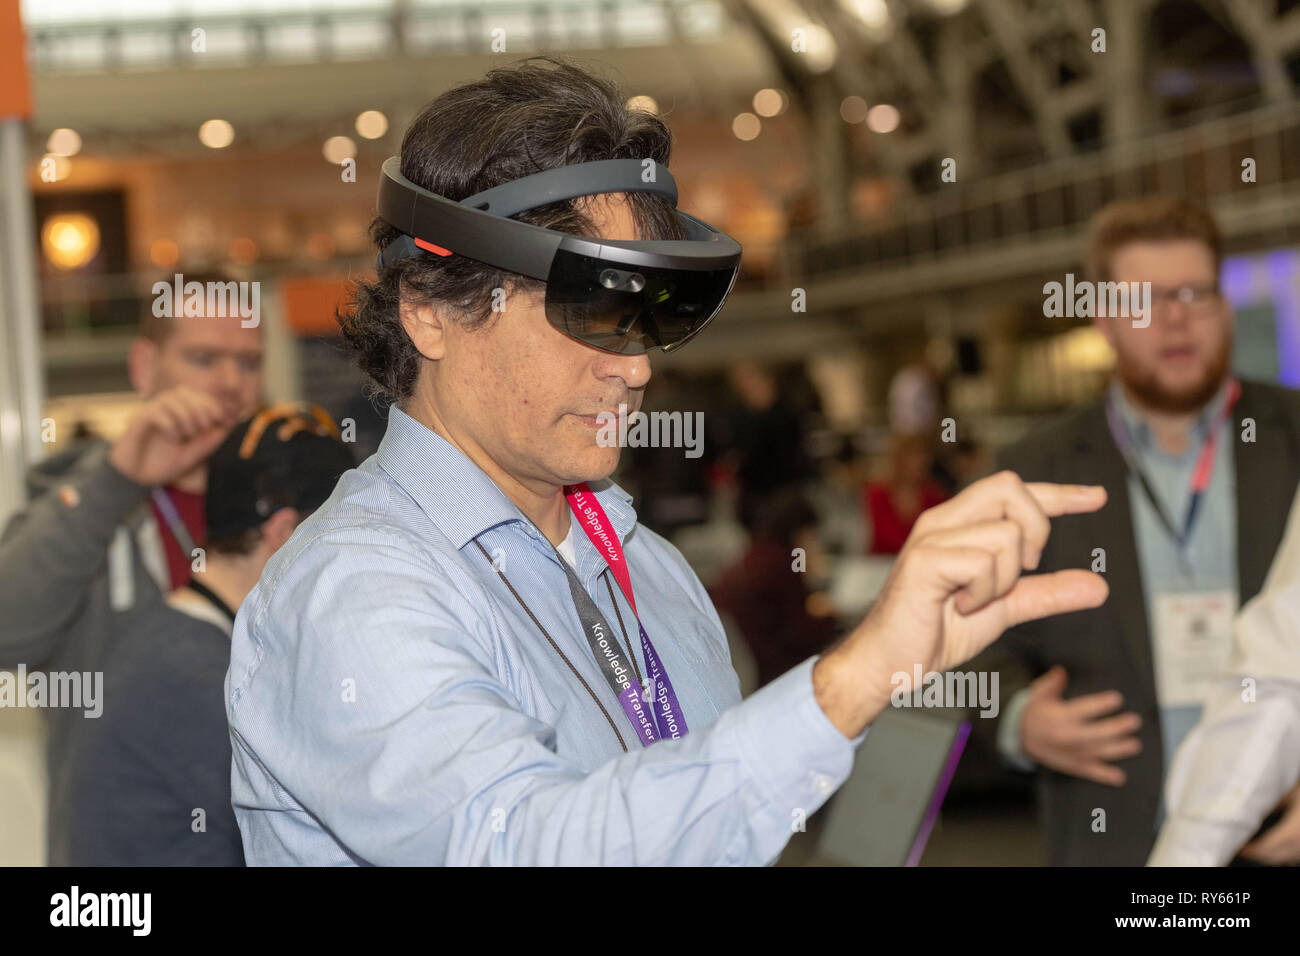 London, UK. 12th March 2019. Augmented reality headset from KitAR at The Wearable Technology Show at the Business Design Centre, The largest dedicated event for connected technology, the show features innovative products from start-ups as well as products from major technology companies and includes the latest in virtual reality and augmented reality devices and software Credit: Ian Davidson/Alamy Live News Stock Photo